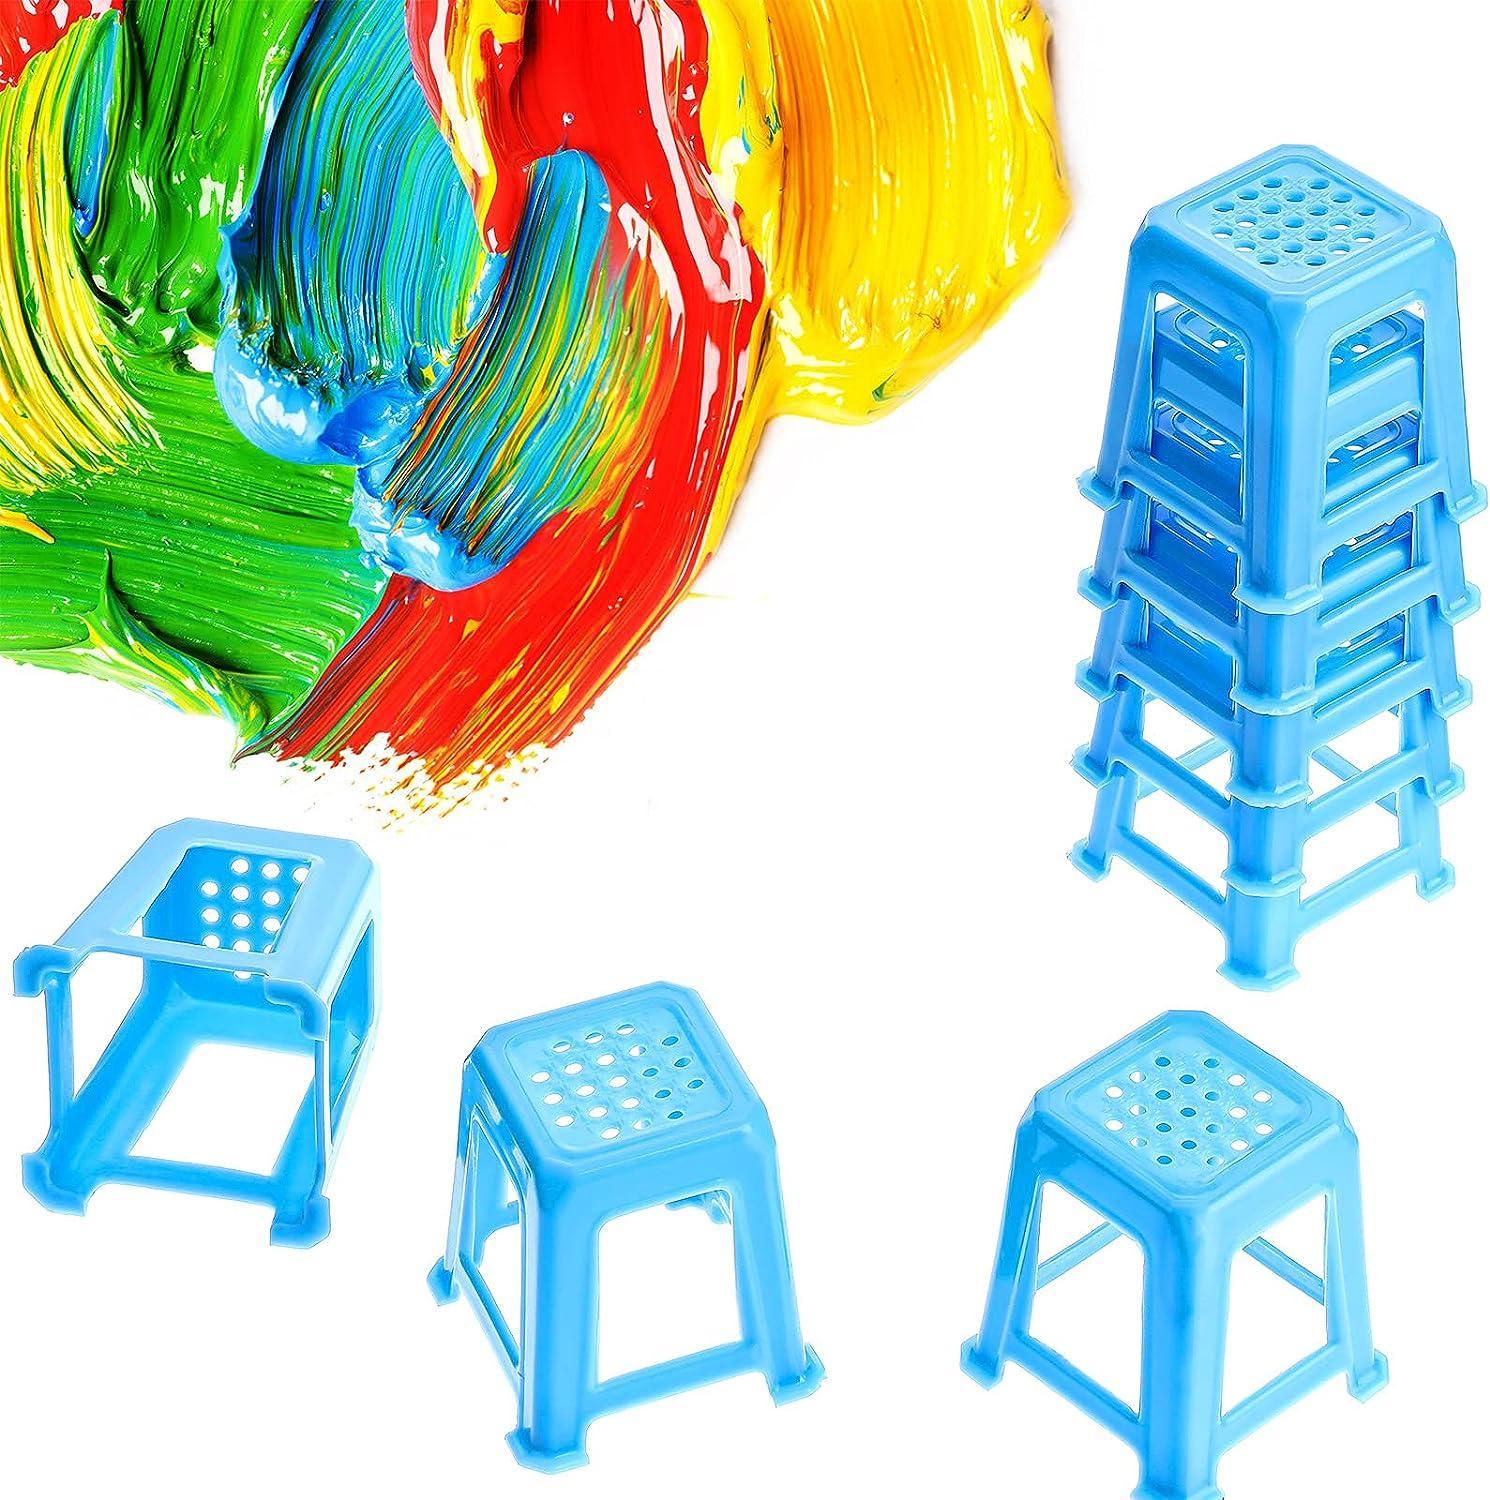 8 Pieces Canvas Stands Paint Stands for Painting Mini Canvas Feet